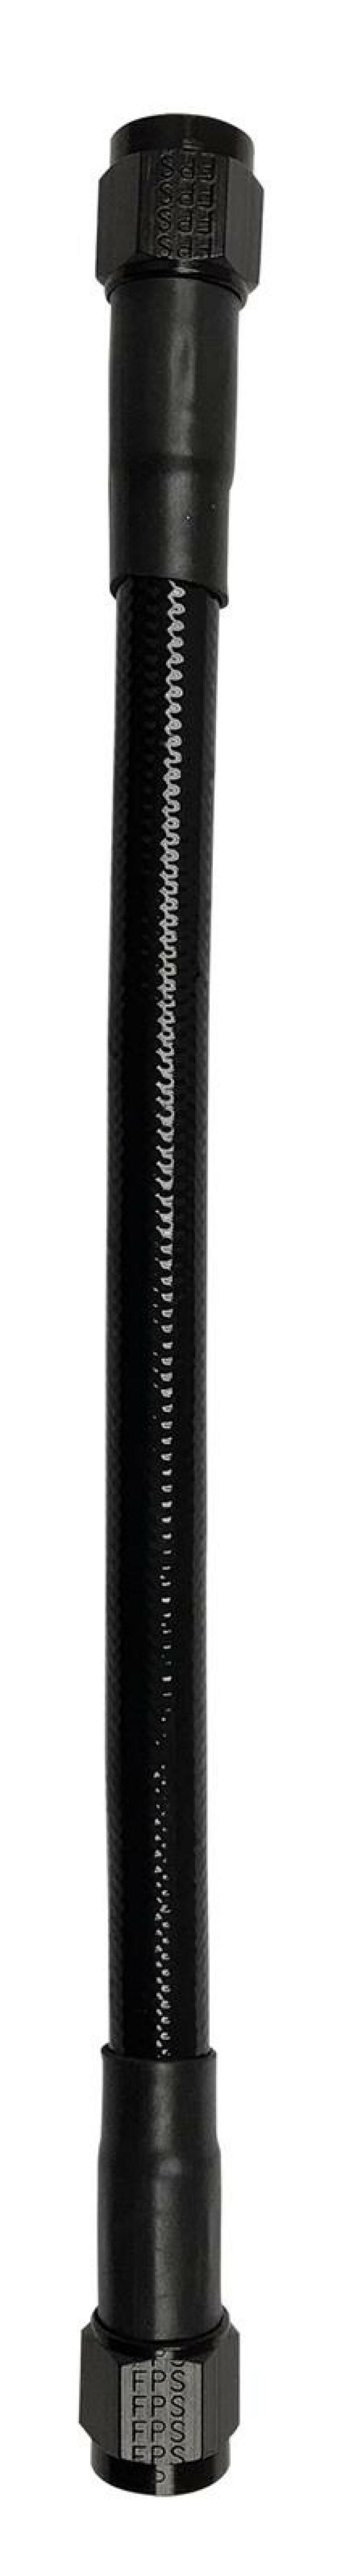 Fragola -6AN Ext Black PTFE Hose Assembly Straight x Straight 24in - 6026-1-1-24BL